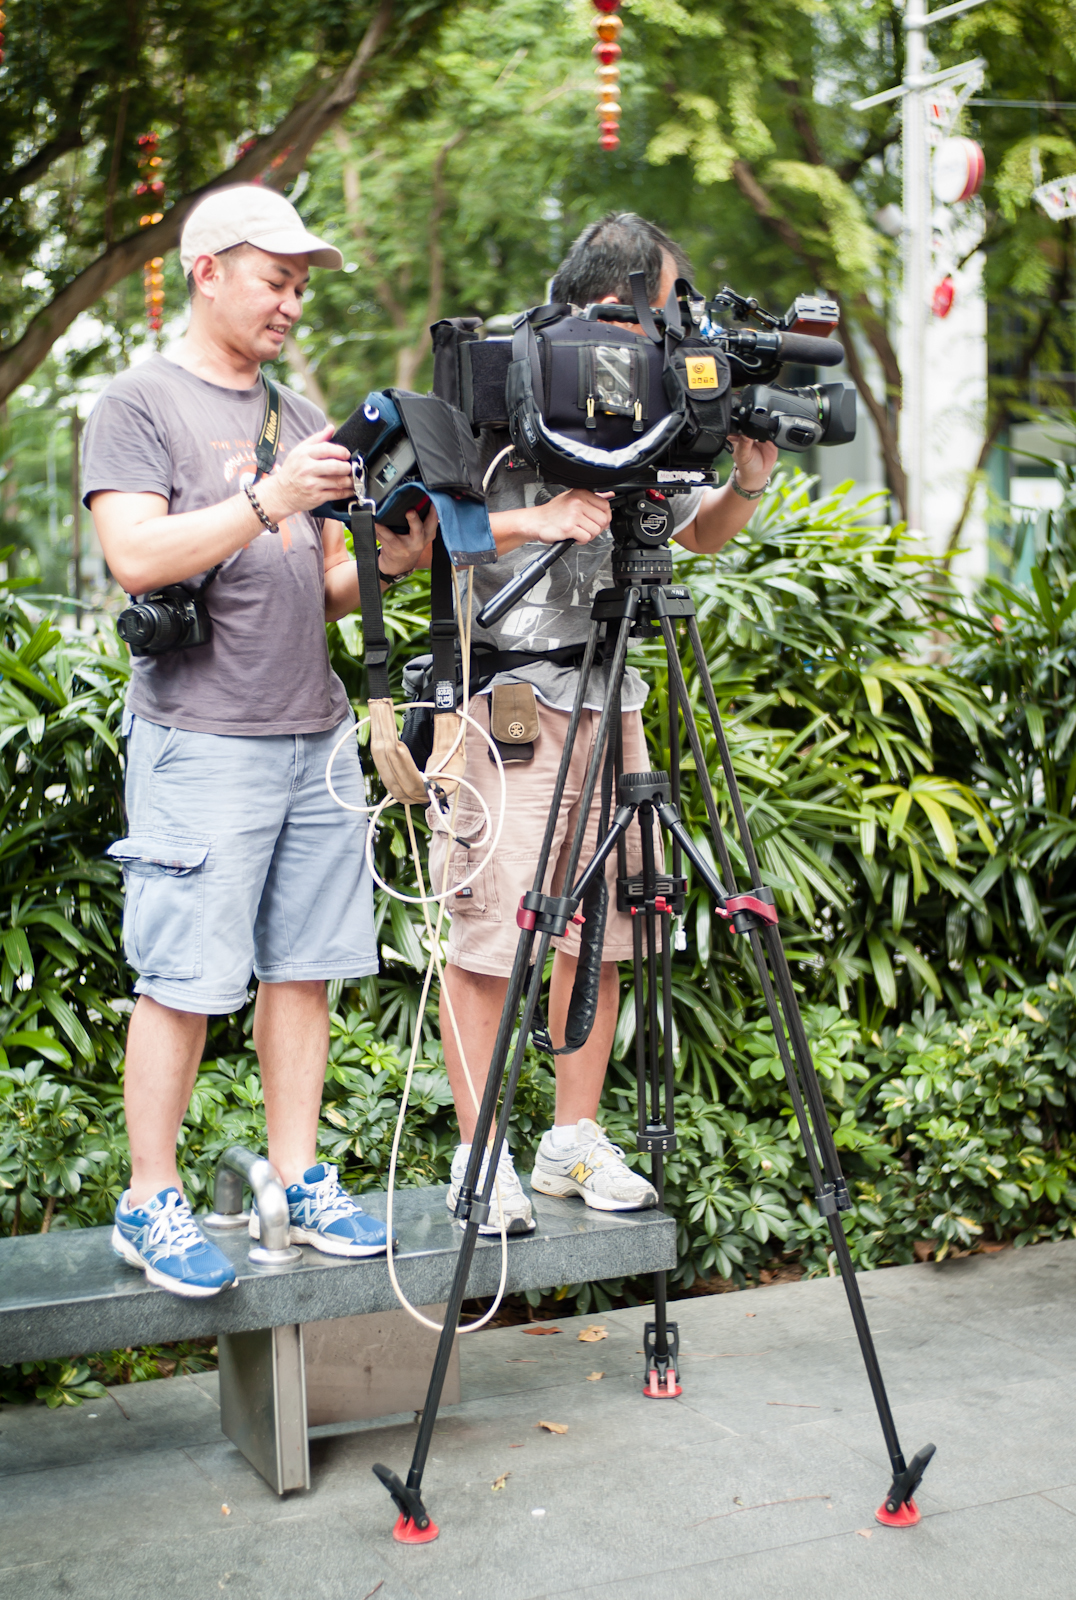 Video crew at work along Orchard Road